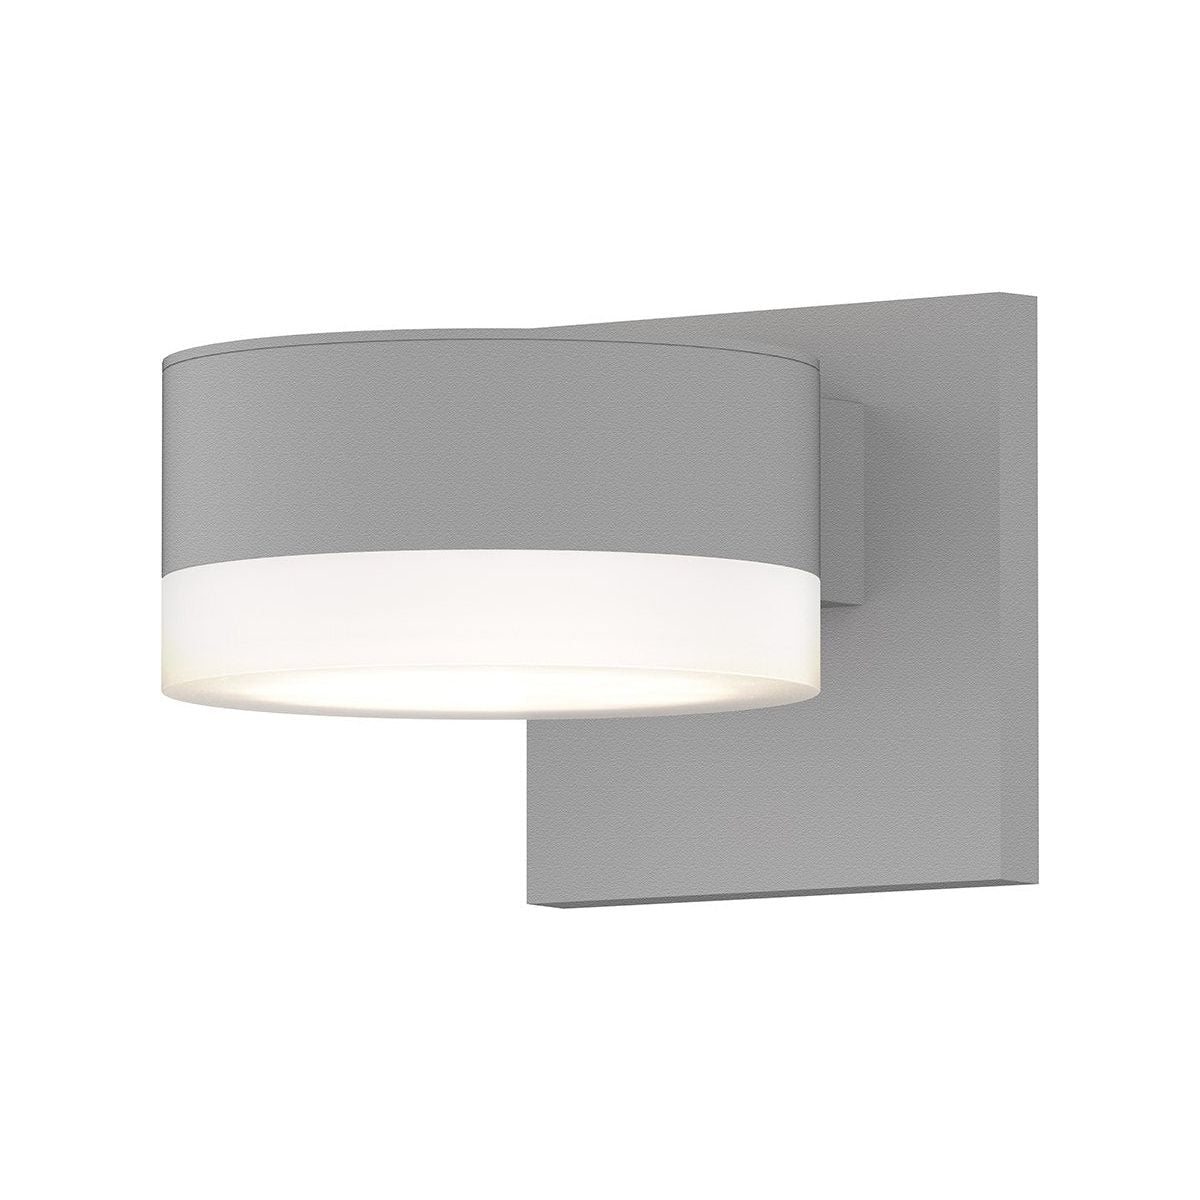 REALS Up/Down LED Sconce with Plate Top and Cylinder Bottom